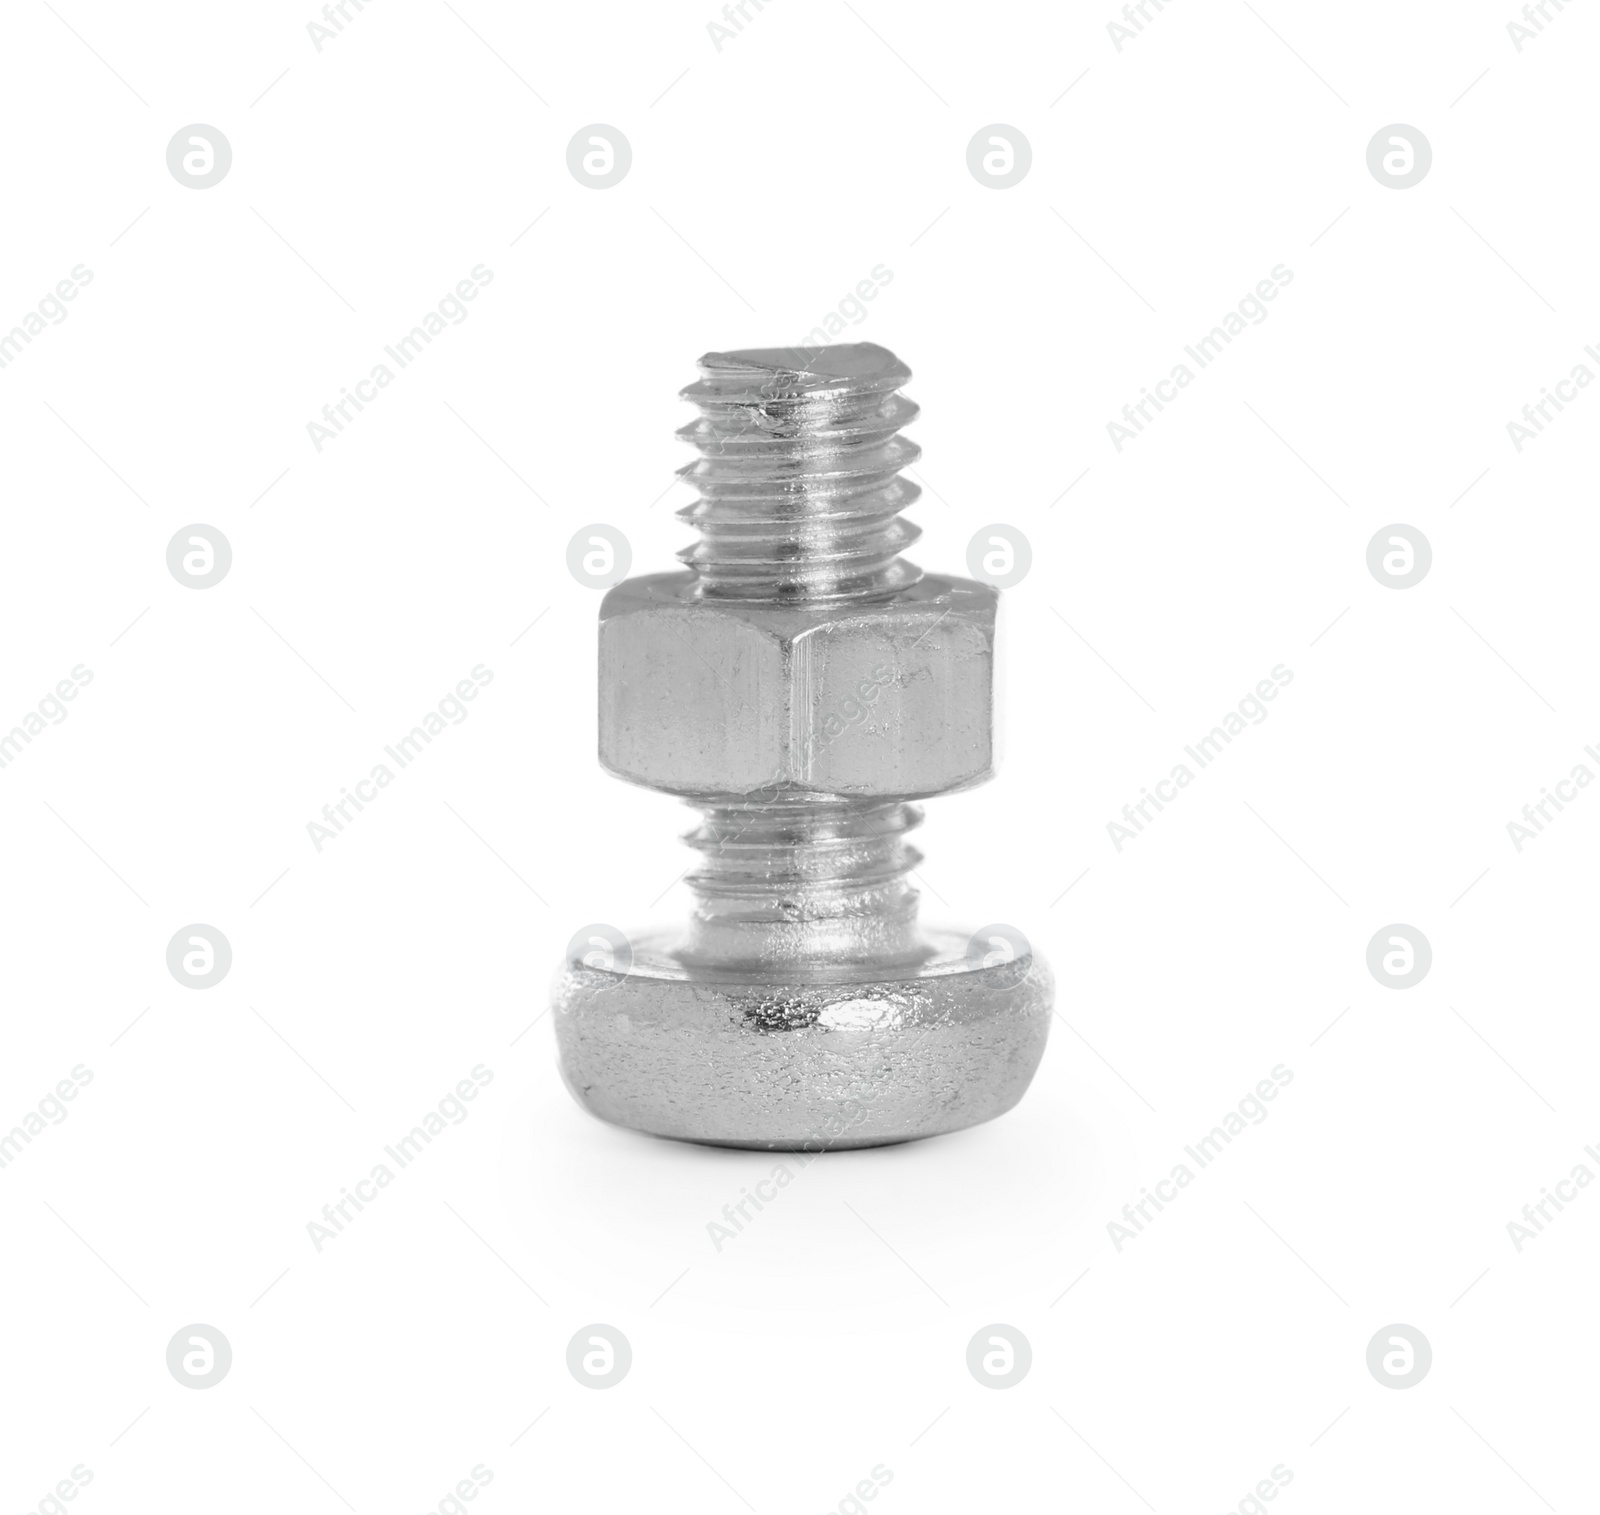 Photo of Small metal bolt with hex nut isolated on white